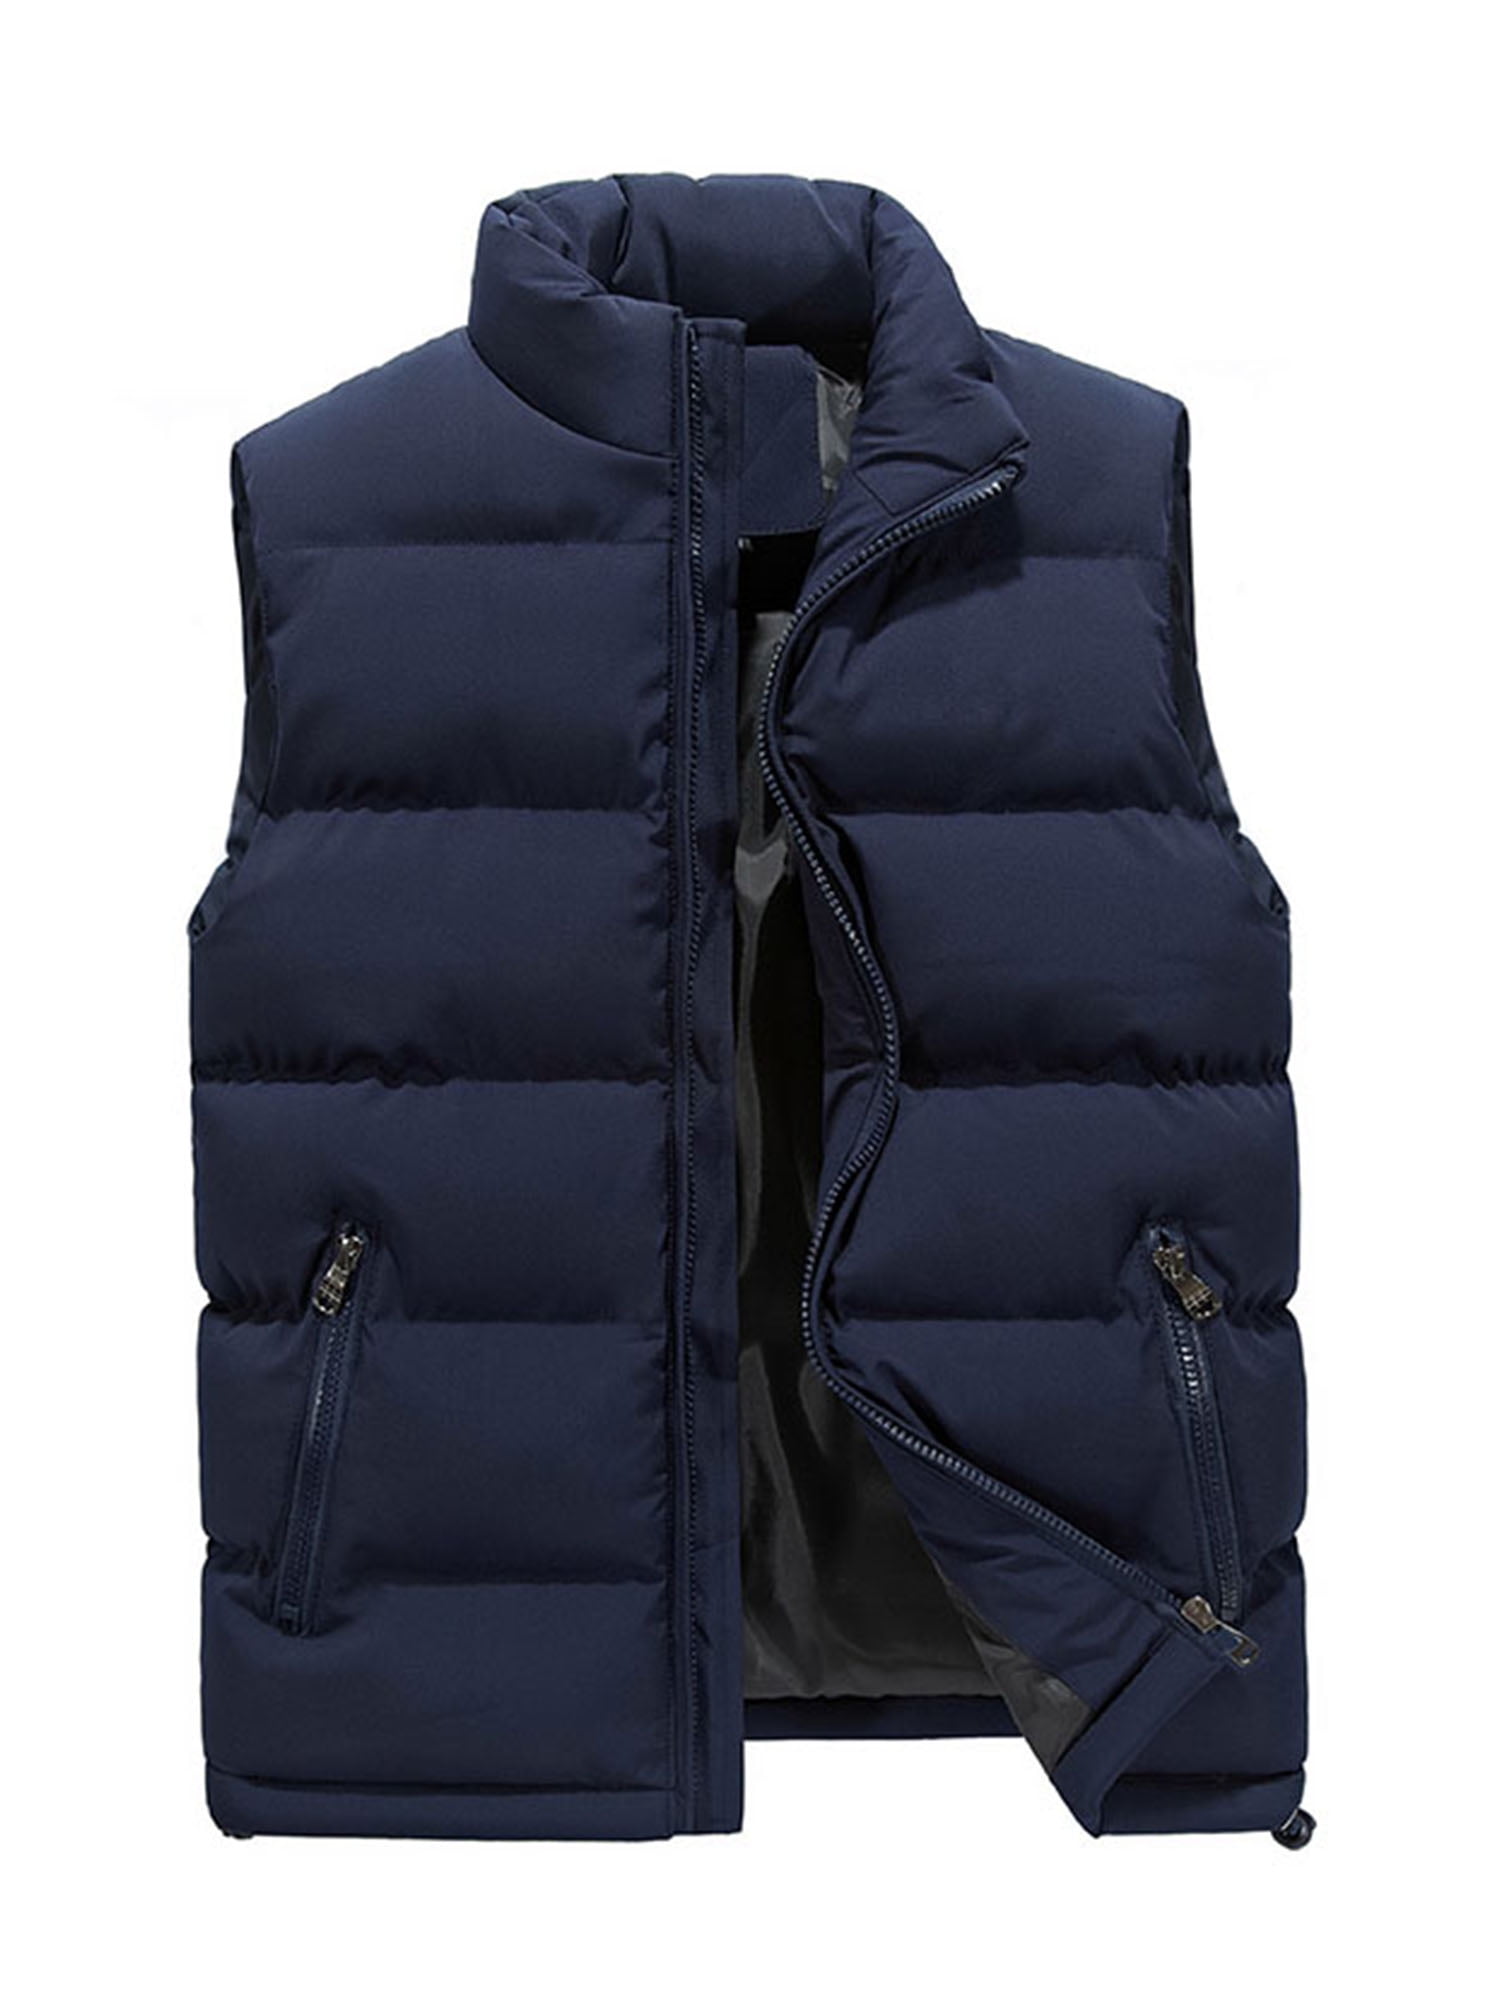 Mens Puffer Vest Jacket Bubble Coat Quilted Padded Outwear Winter Light Weight